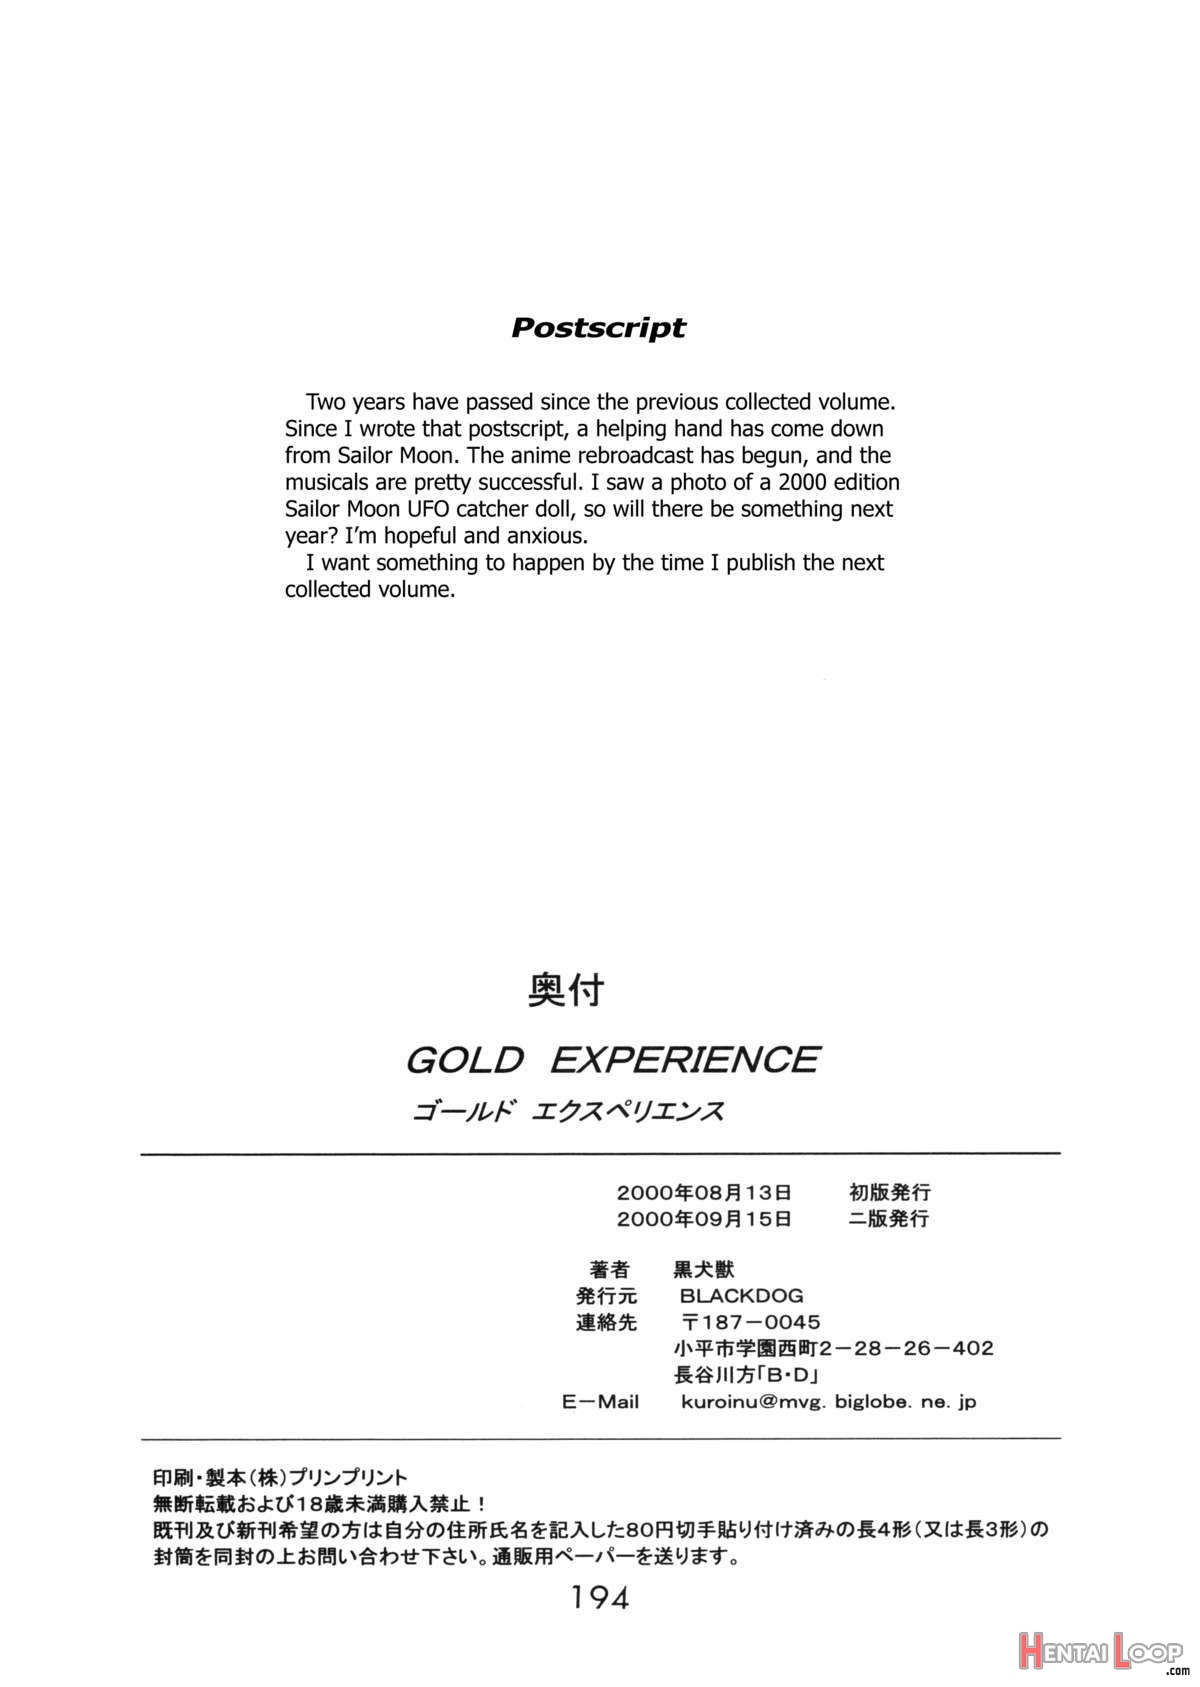 Gold Experience page 191